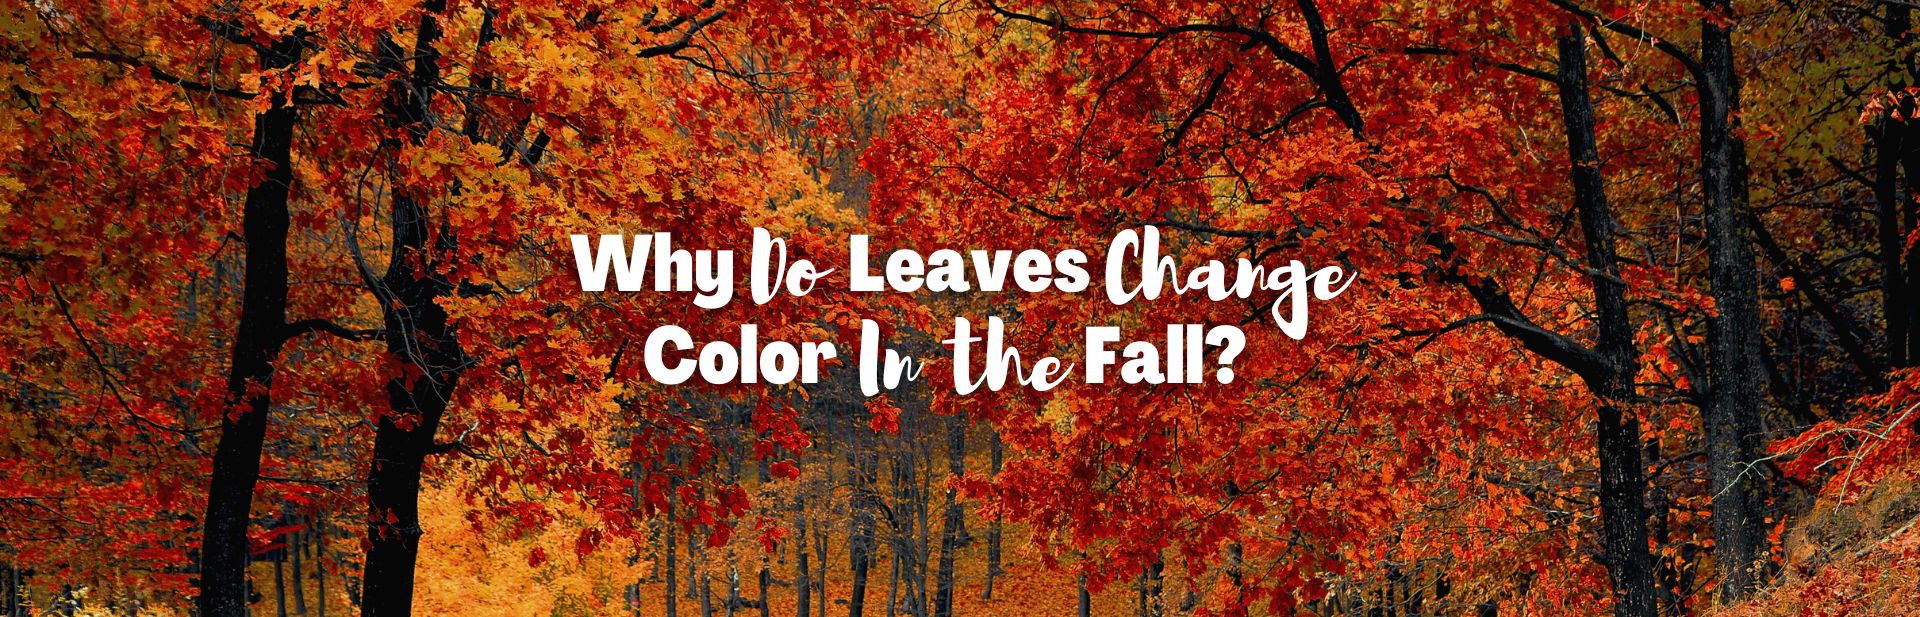 Why Do Leaves Change Color in the Fall? Exploring The Colorful Science of Fall Colors